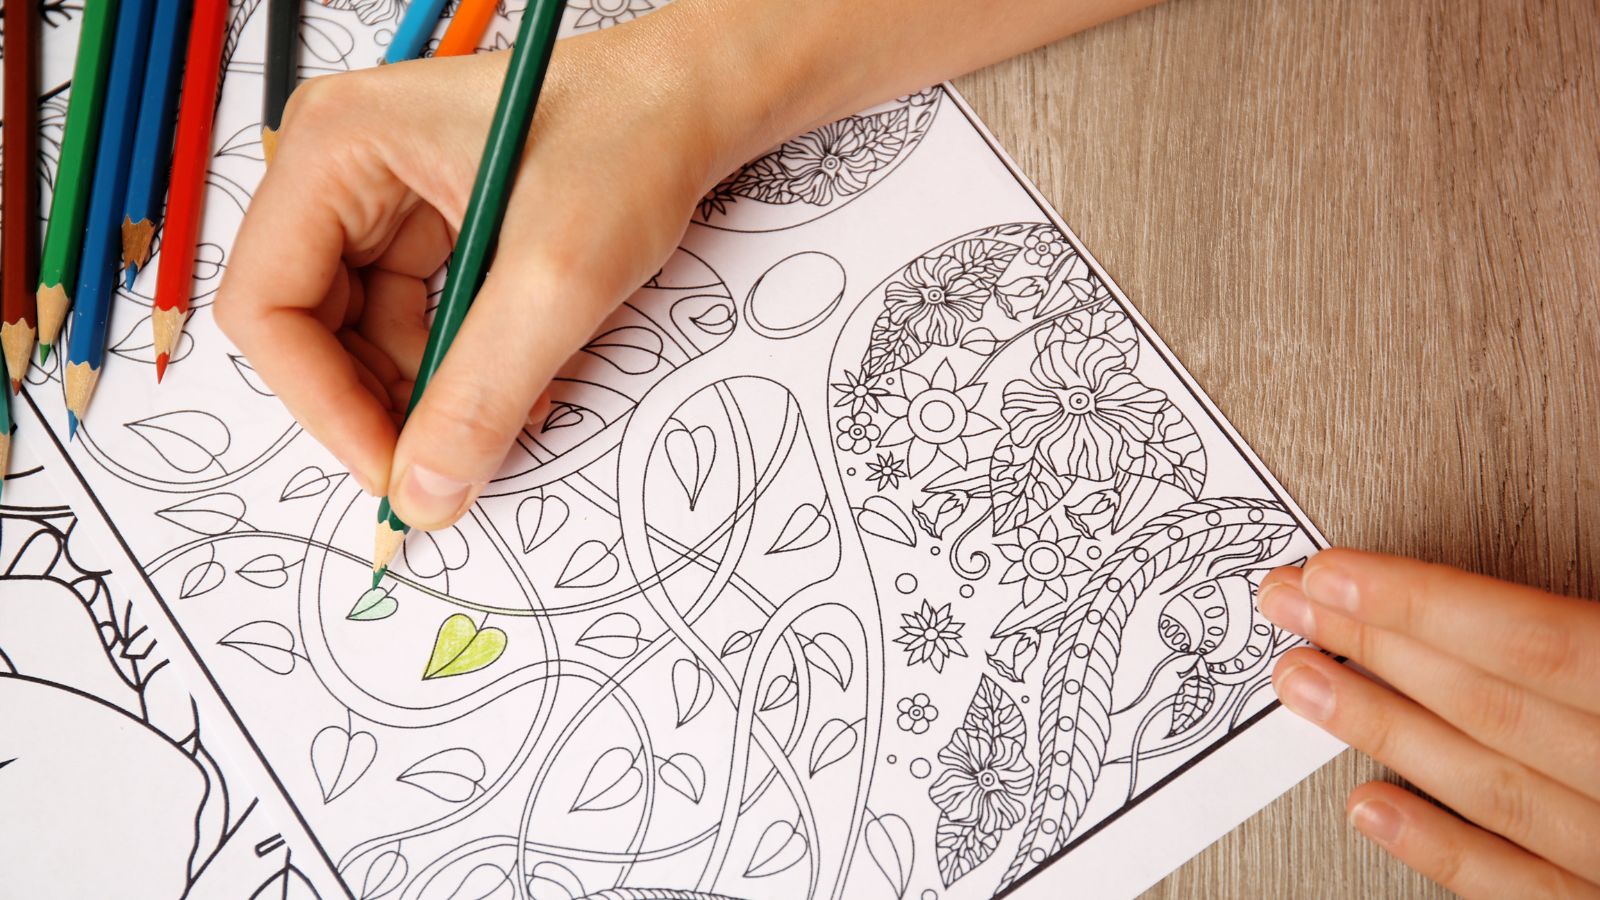 How to Apply Color Theory for Amazing Coloring Pages